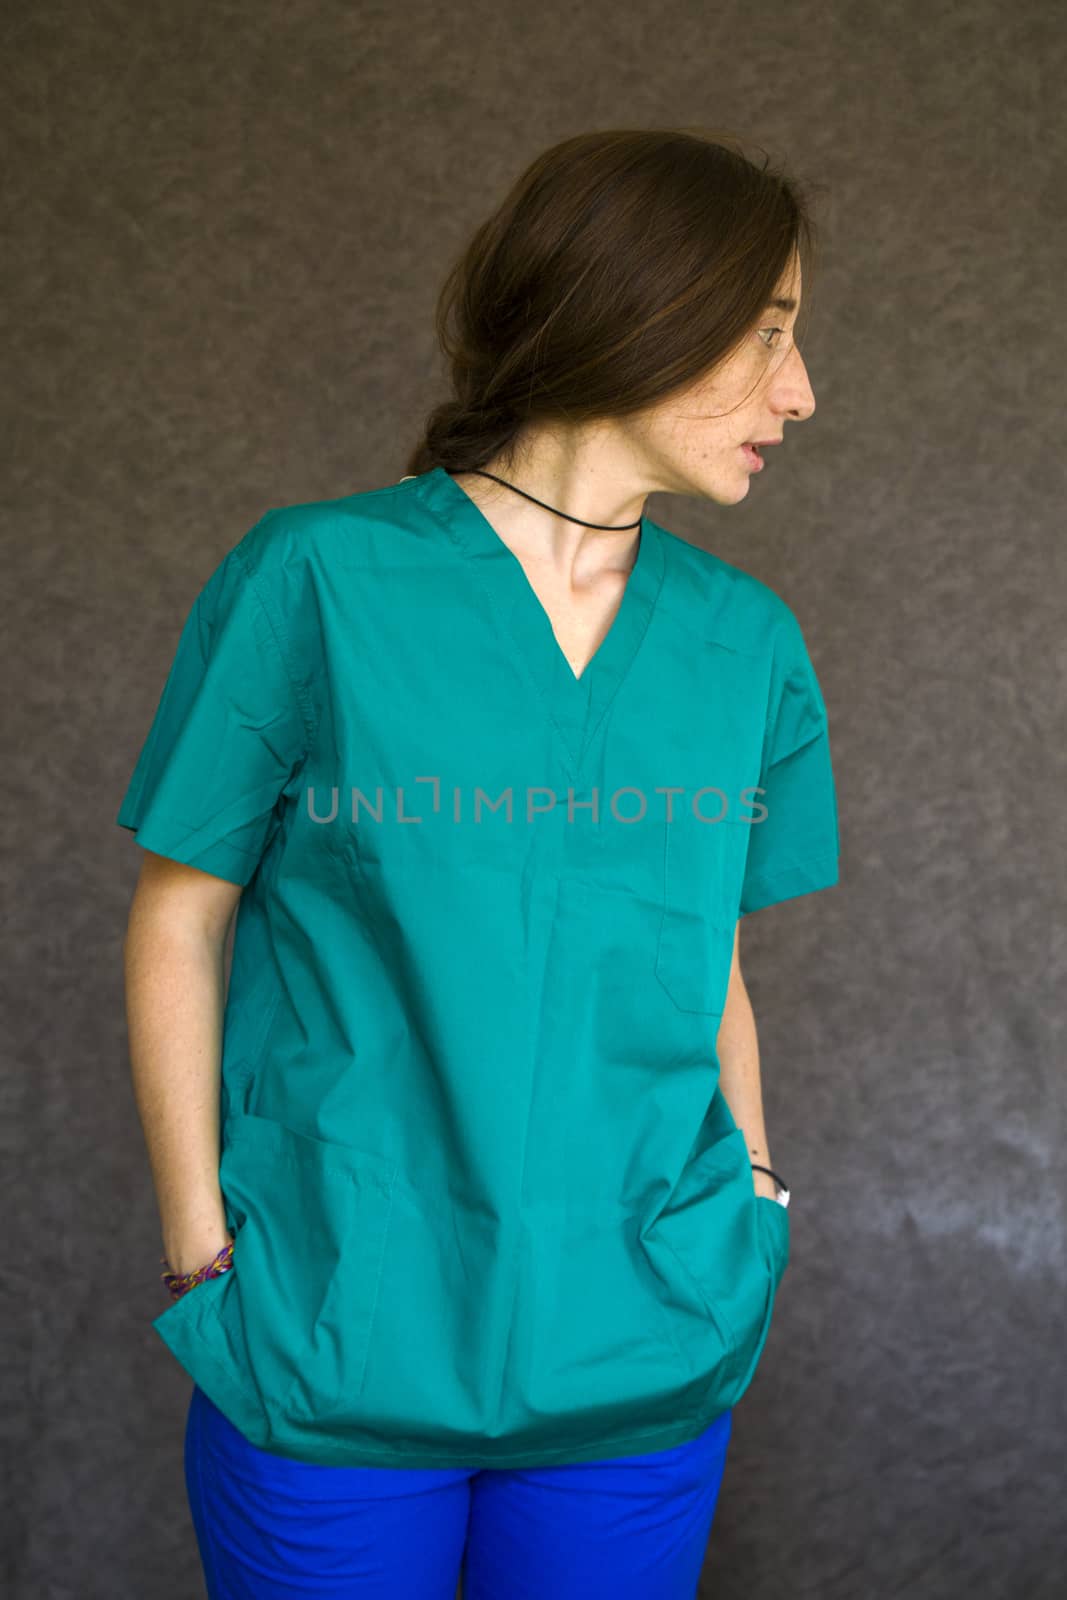 Woman portrait in medical nurse and doctors uniform by Taidundua